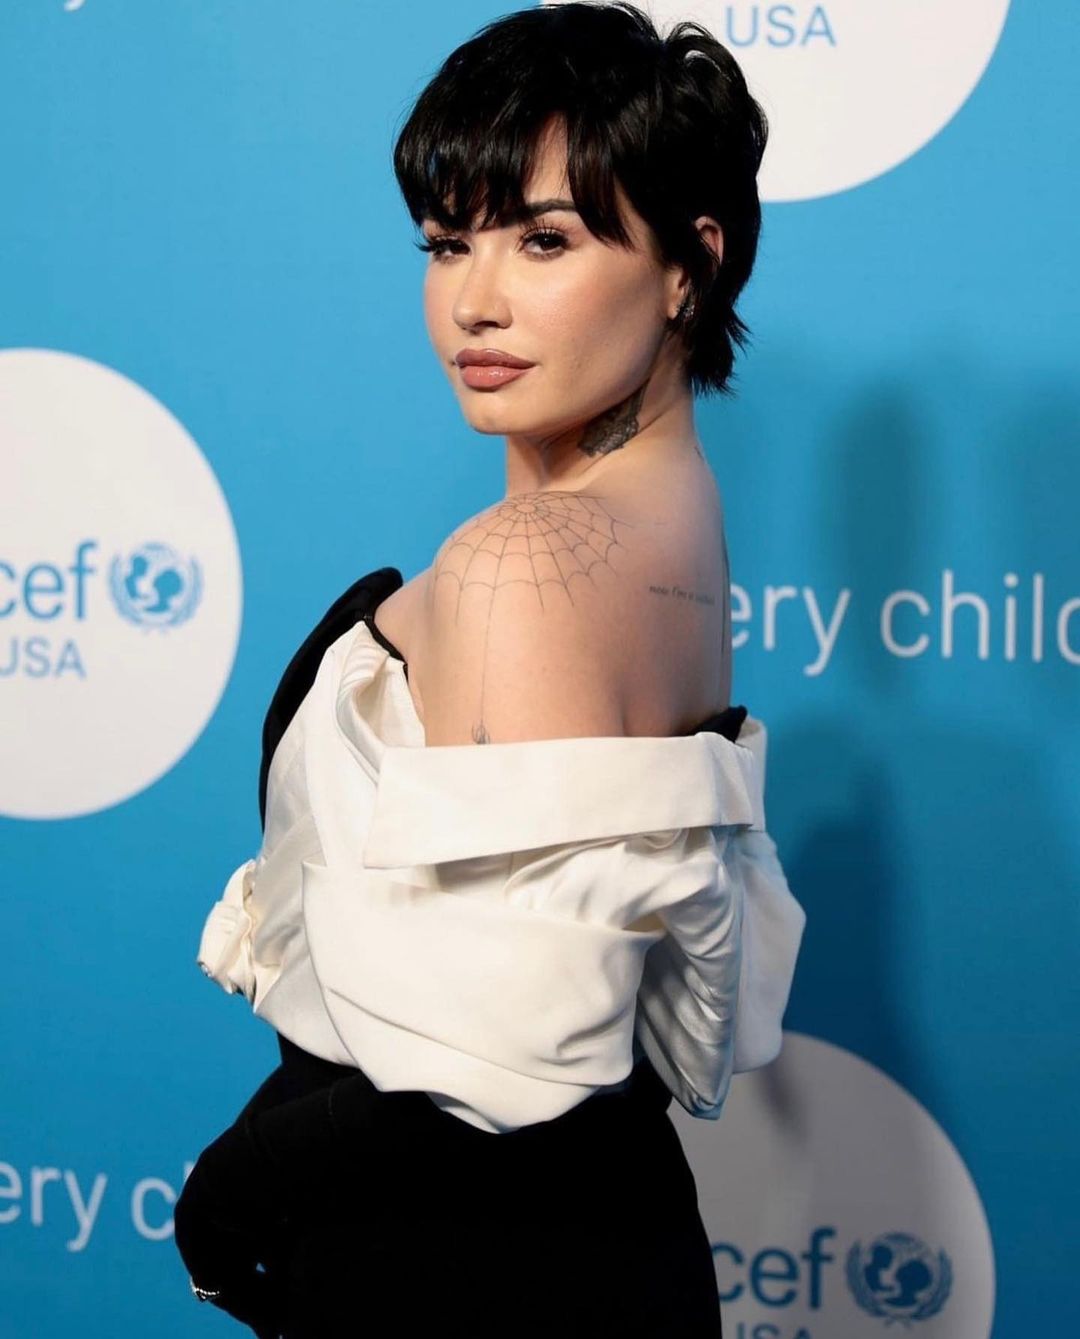 Demi Lovato seen in Off Shoulder Beautiful Dress at UNICEF USA Events, Nov 2022